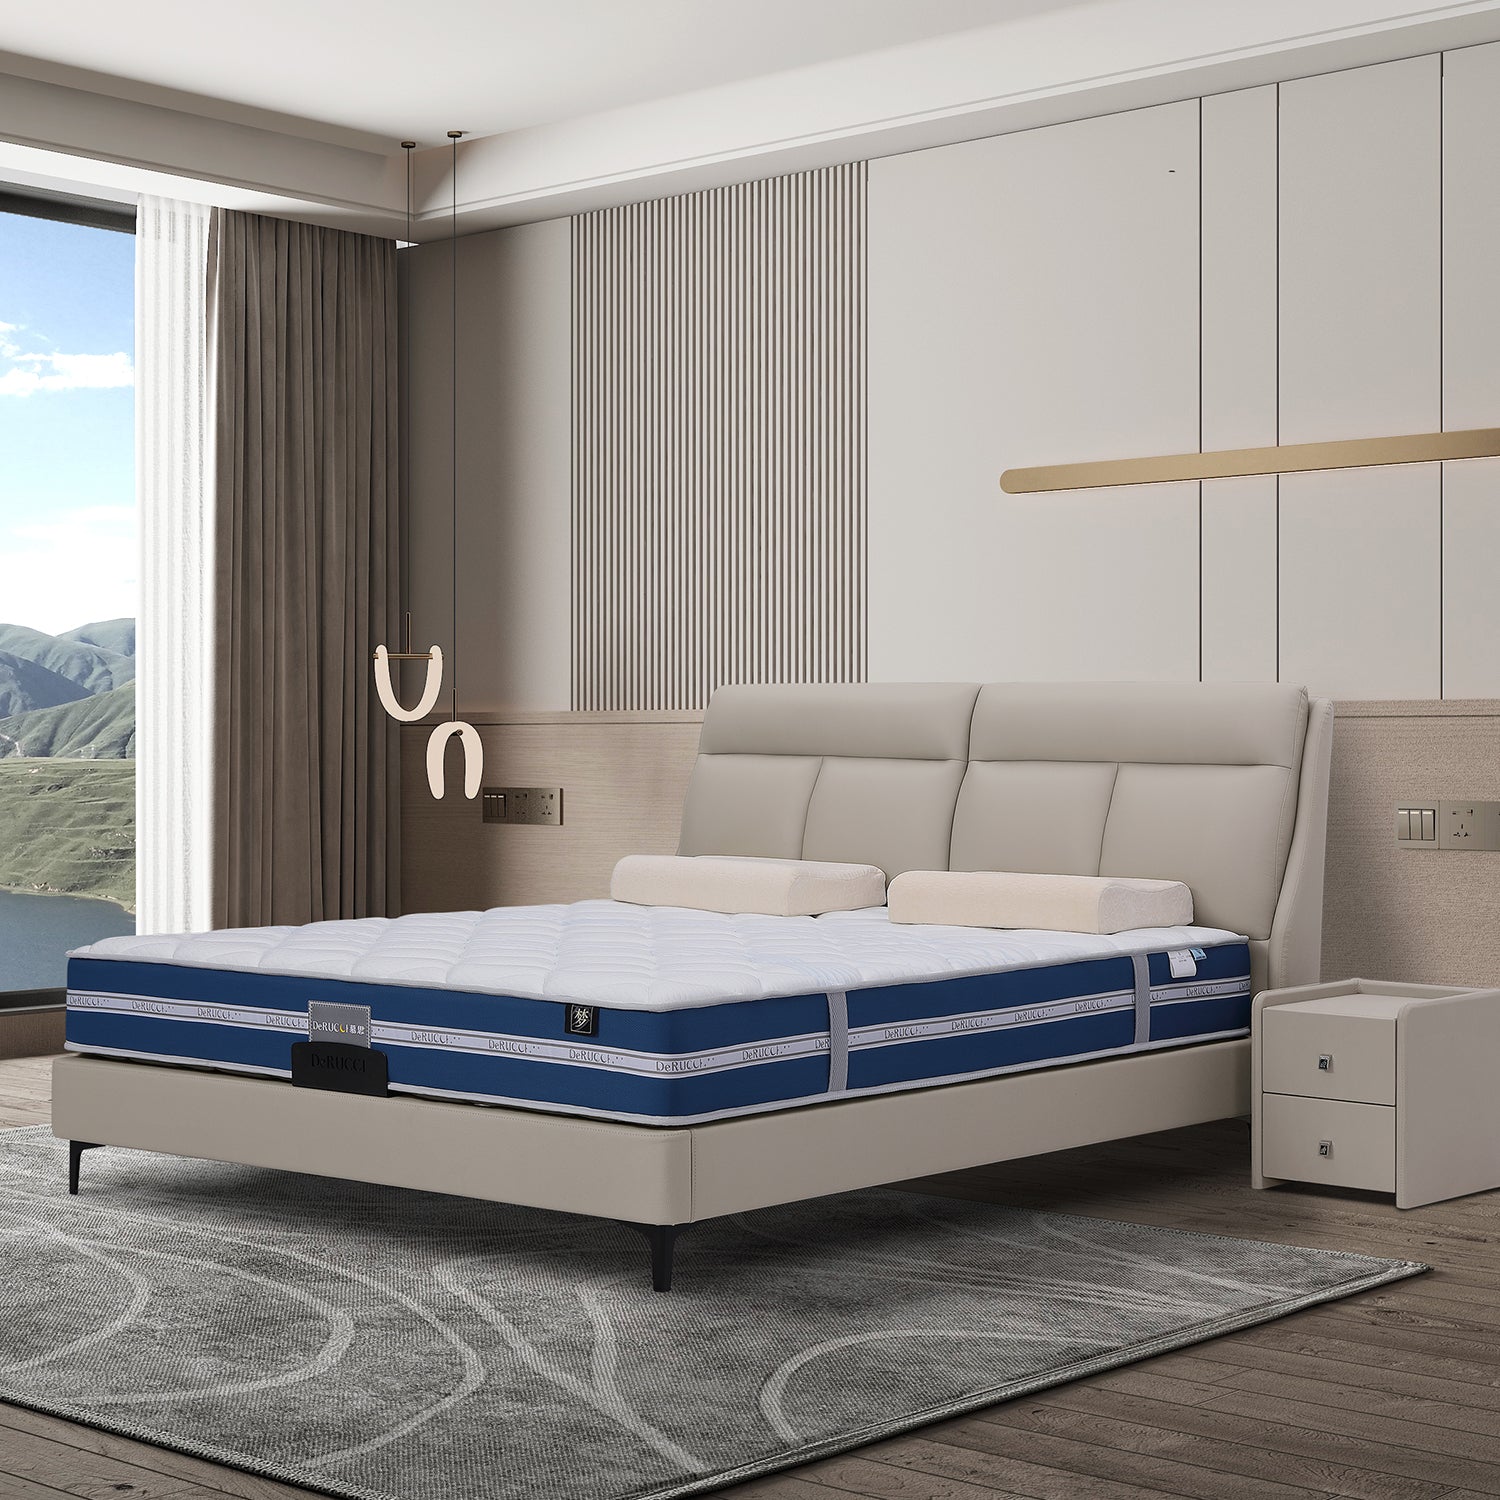 DeRUCCI Bed Frame BOC1 - 002 in top layer leather and PVC with a padded headboard and a blue and white double-layered mattress in a stylish modern bedroom setup with matching white nightstands and scenic window view.